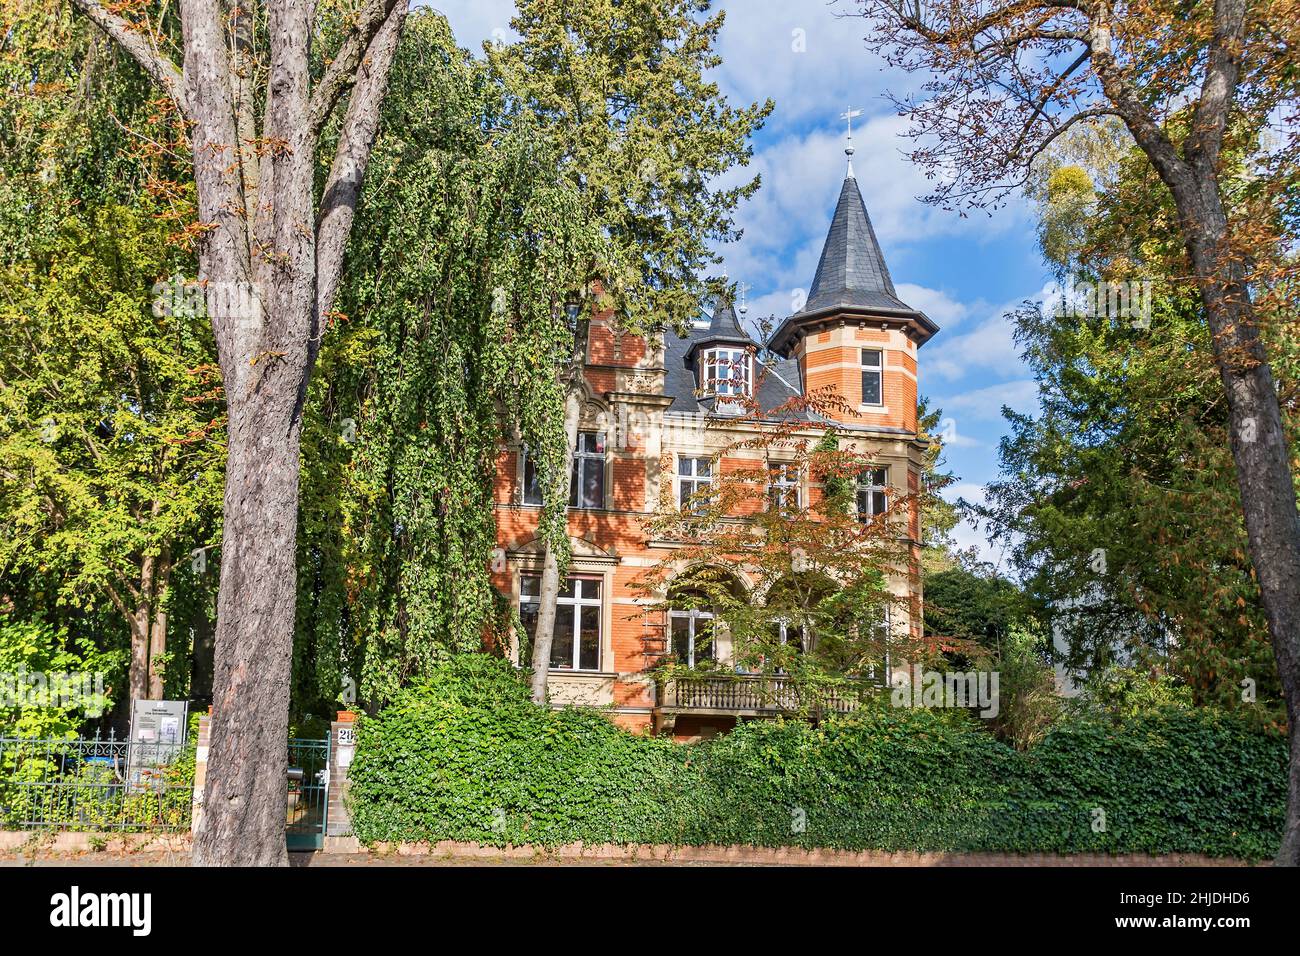 Berlin, Germany - October 12, 2021: Architect villa Emil Schwerdtfeger built in1898 at the street Ringstrasse 28 listet in Cultural heritage monuments Stock Photo